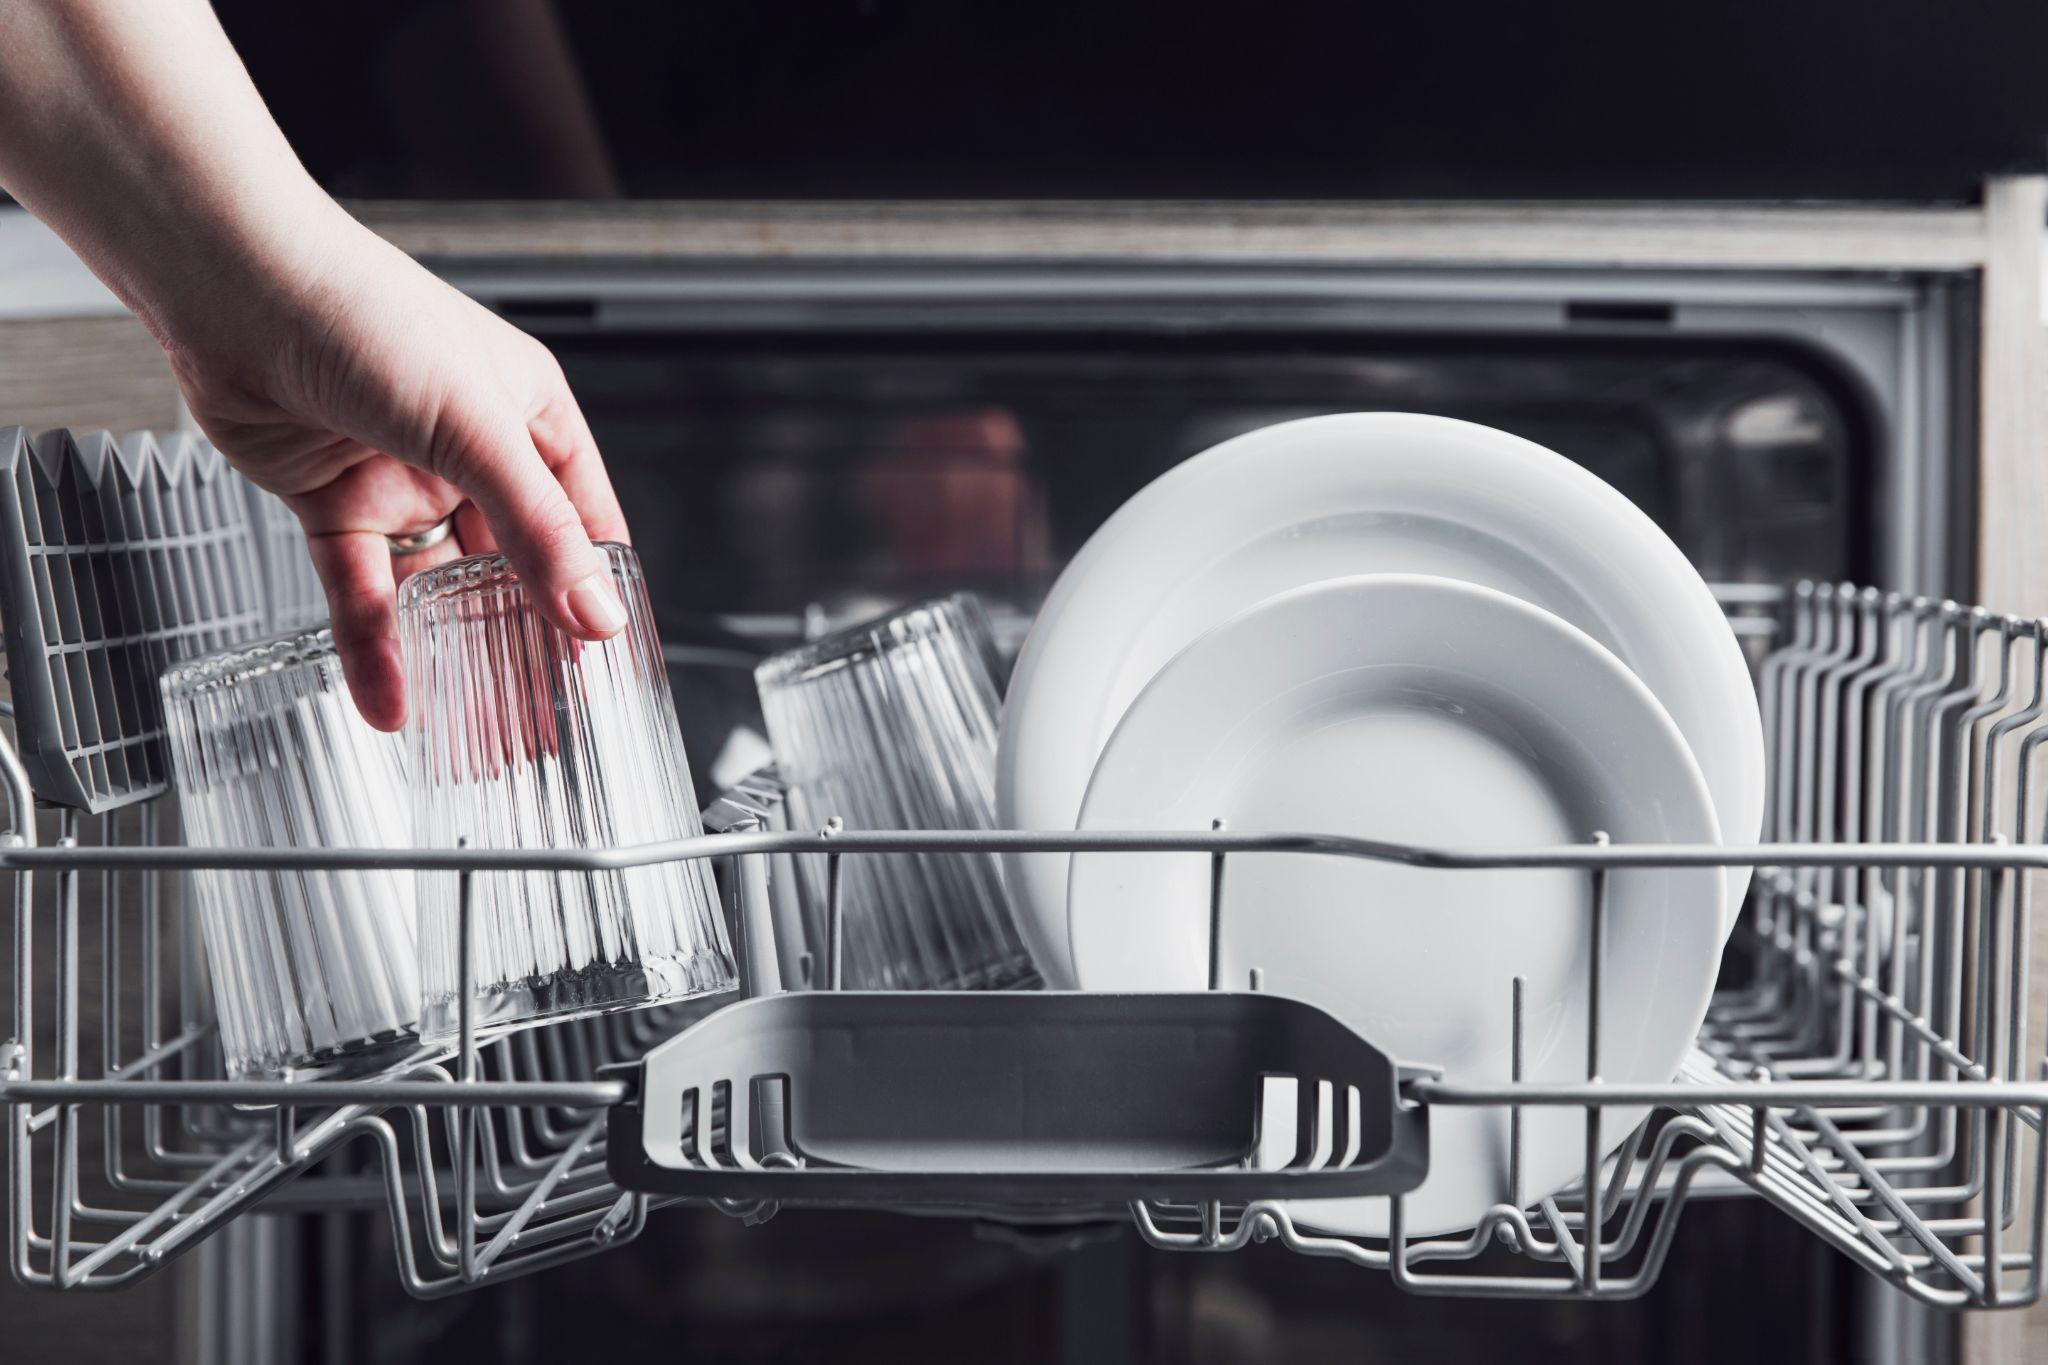 Person loading up the dishwasher